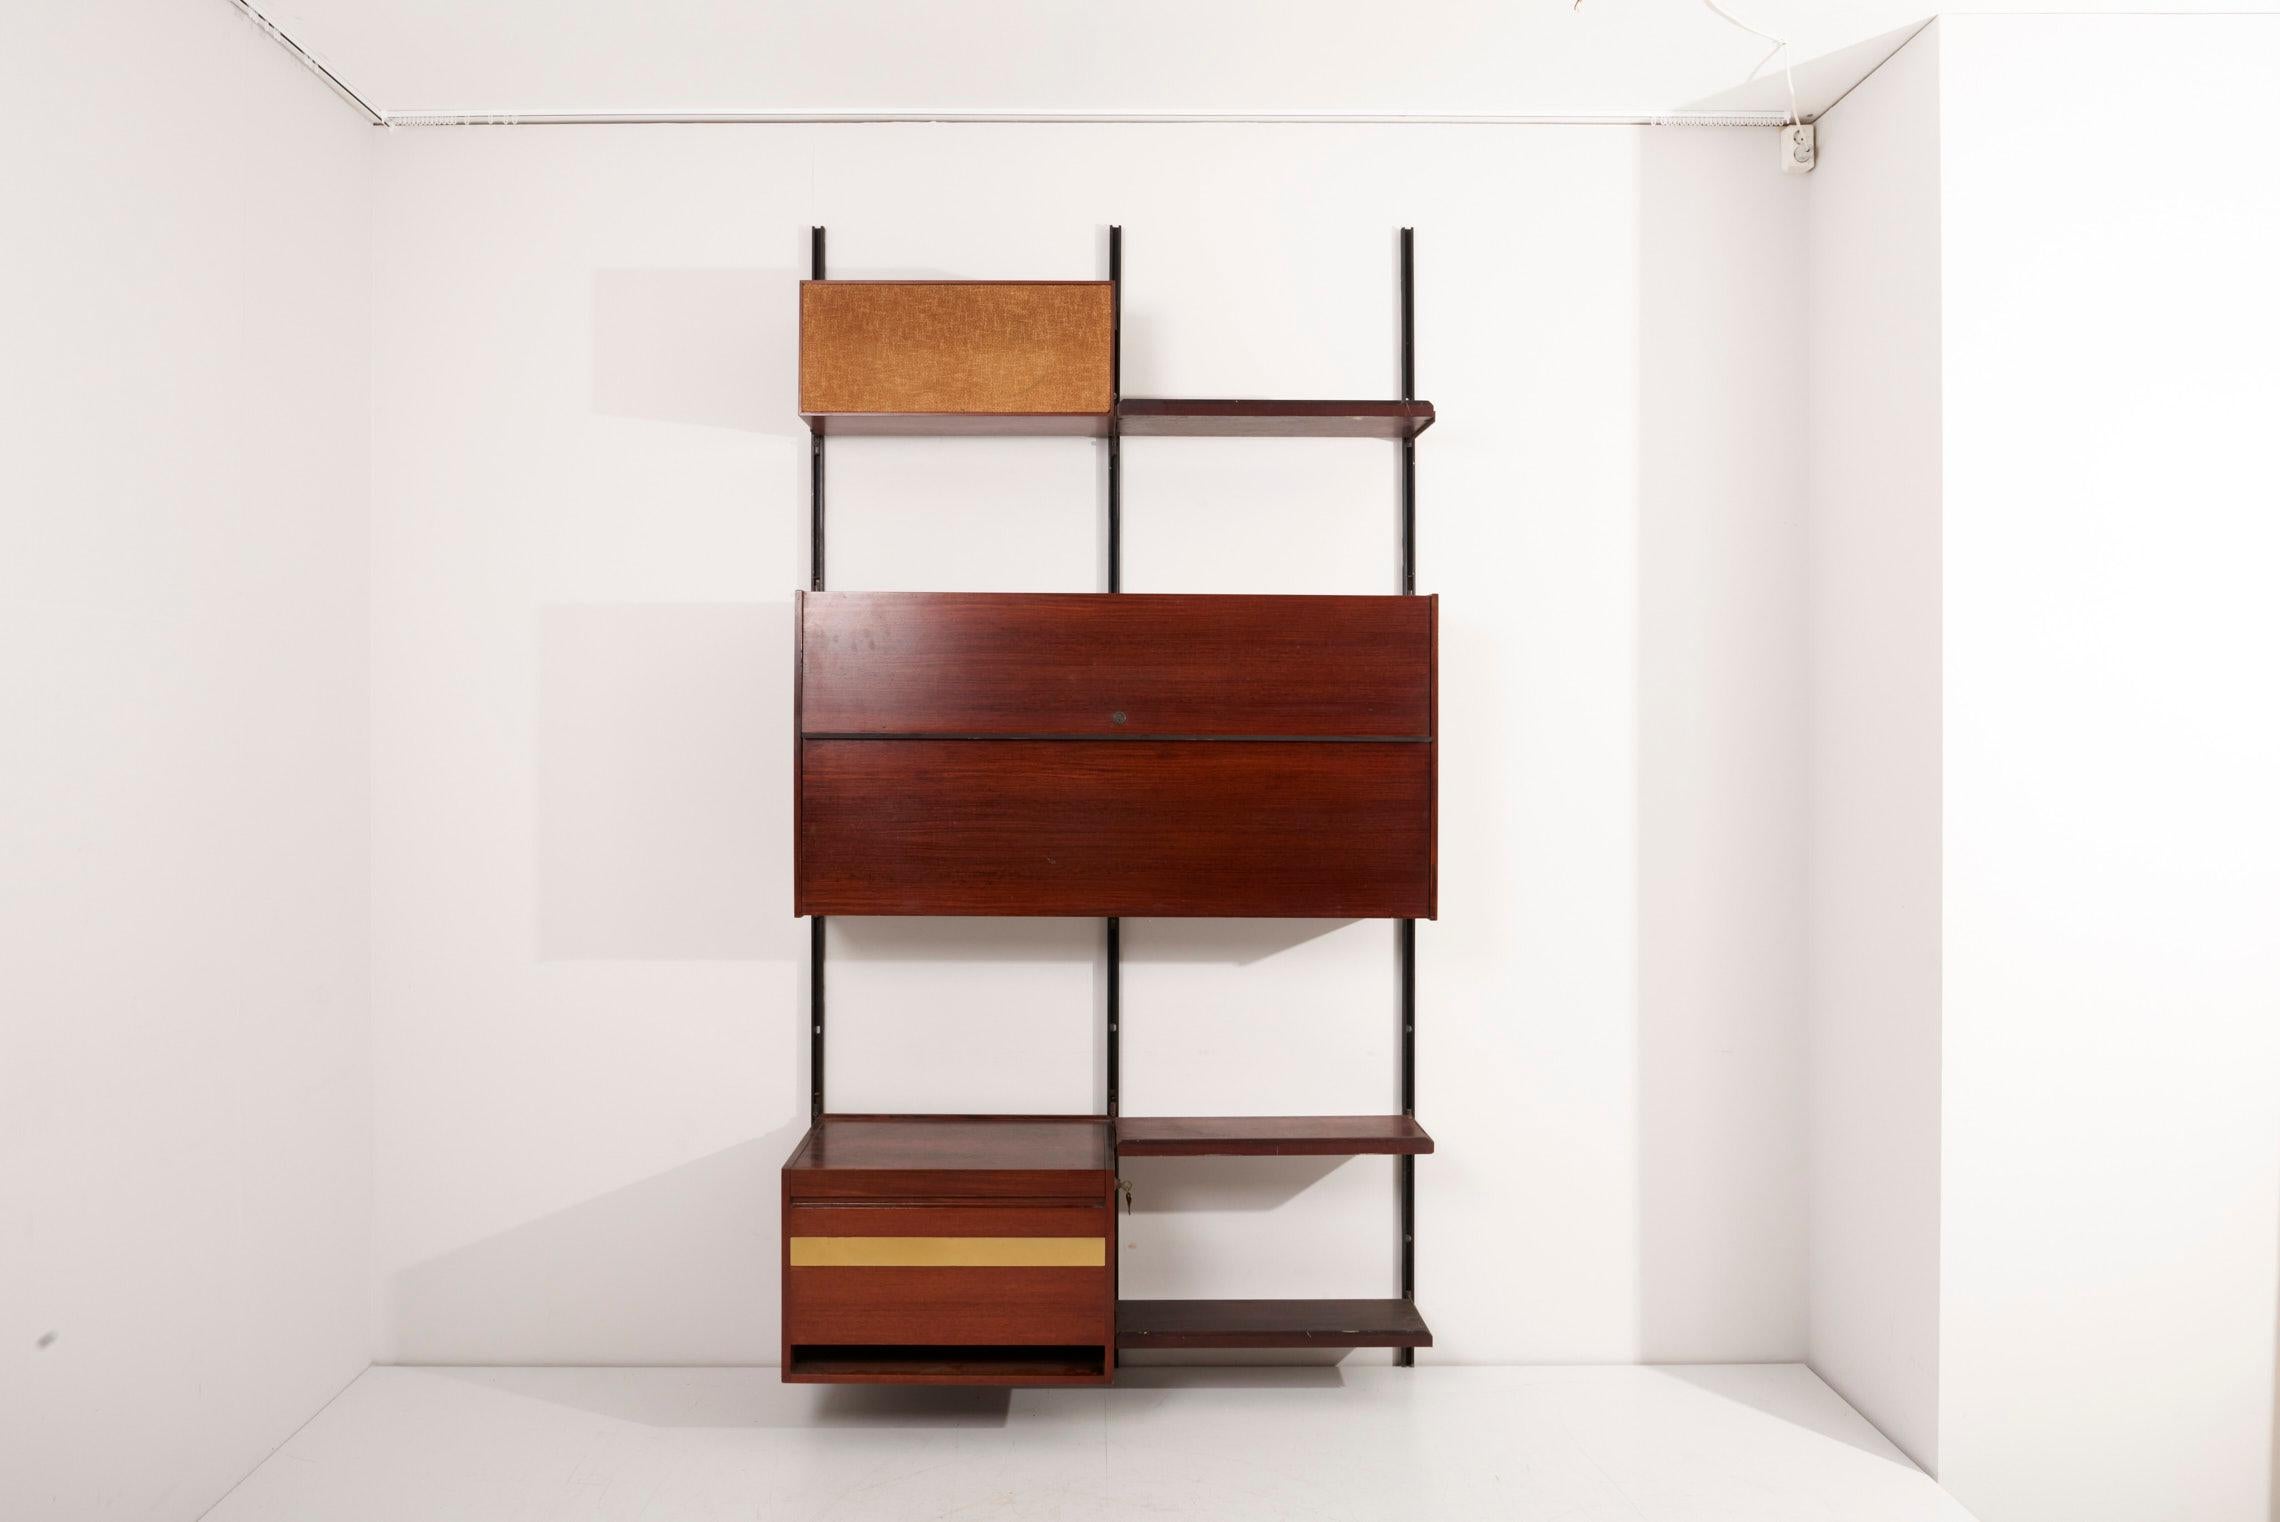 Italian Mid-Century Modern wall unit by Osvaldo Borsani for Tecno. The unit was designed by Borsani as a coordinated system to use either at home or in the office and is flexible. The arrangement of several cabinets can thus be adjusted.